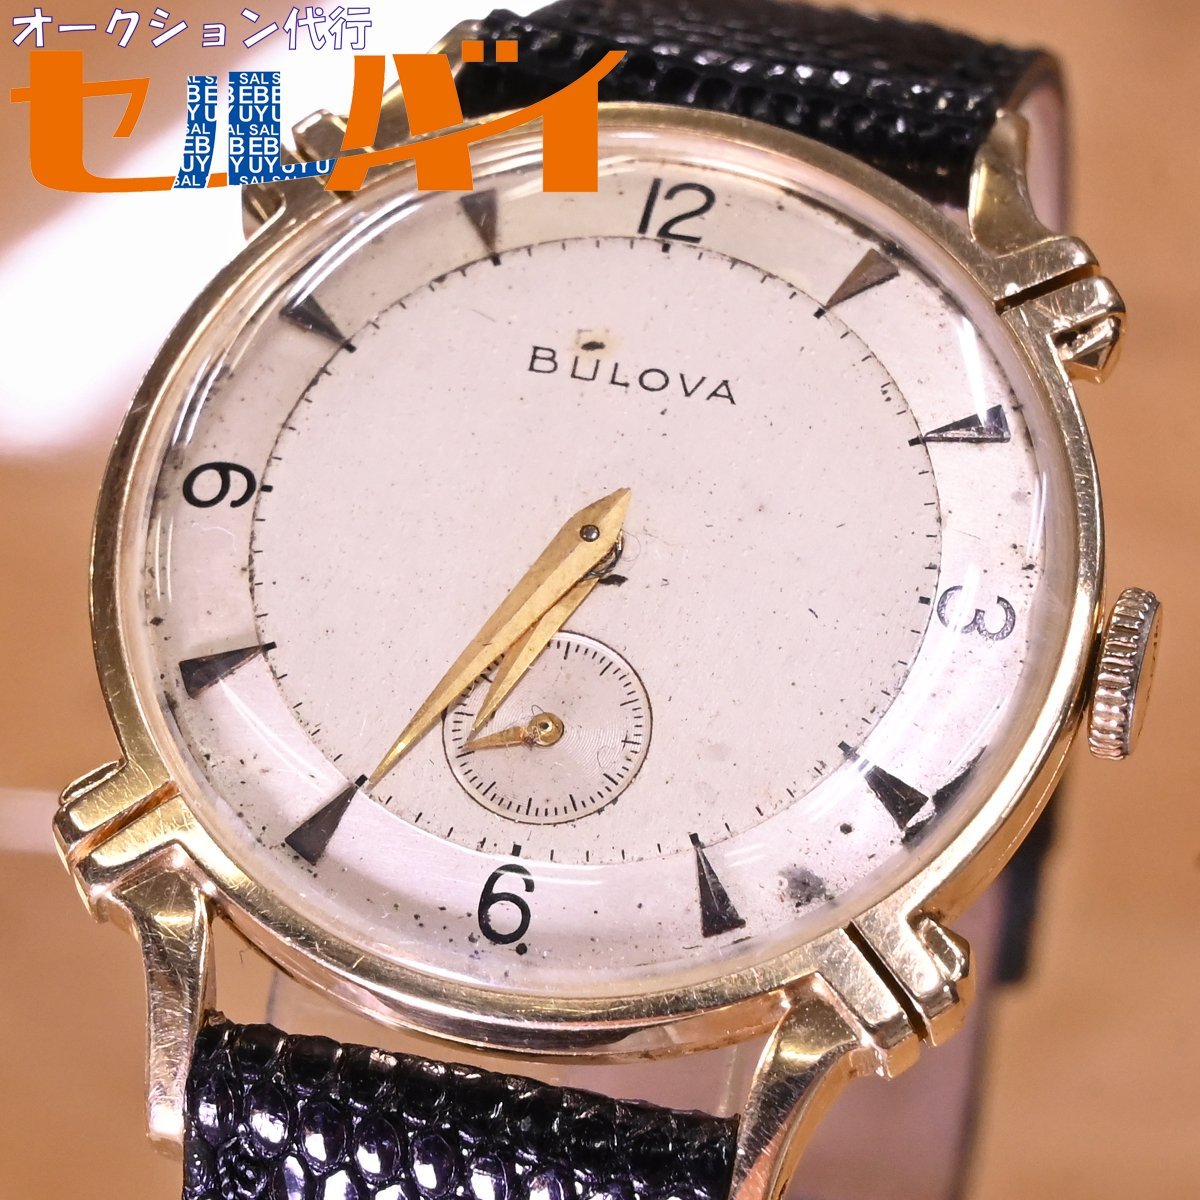 Buroba - (Japanese name) Starts with H - Brand watches